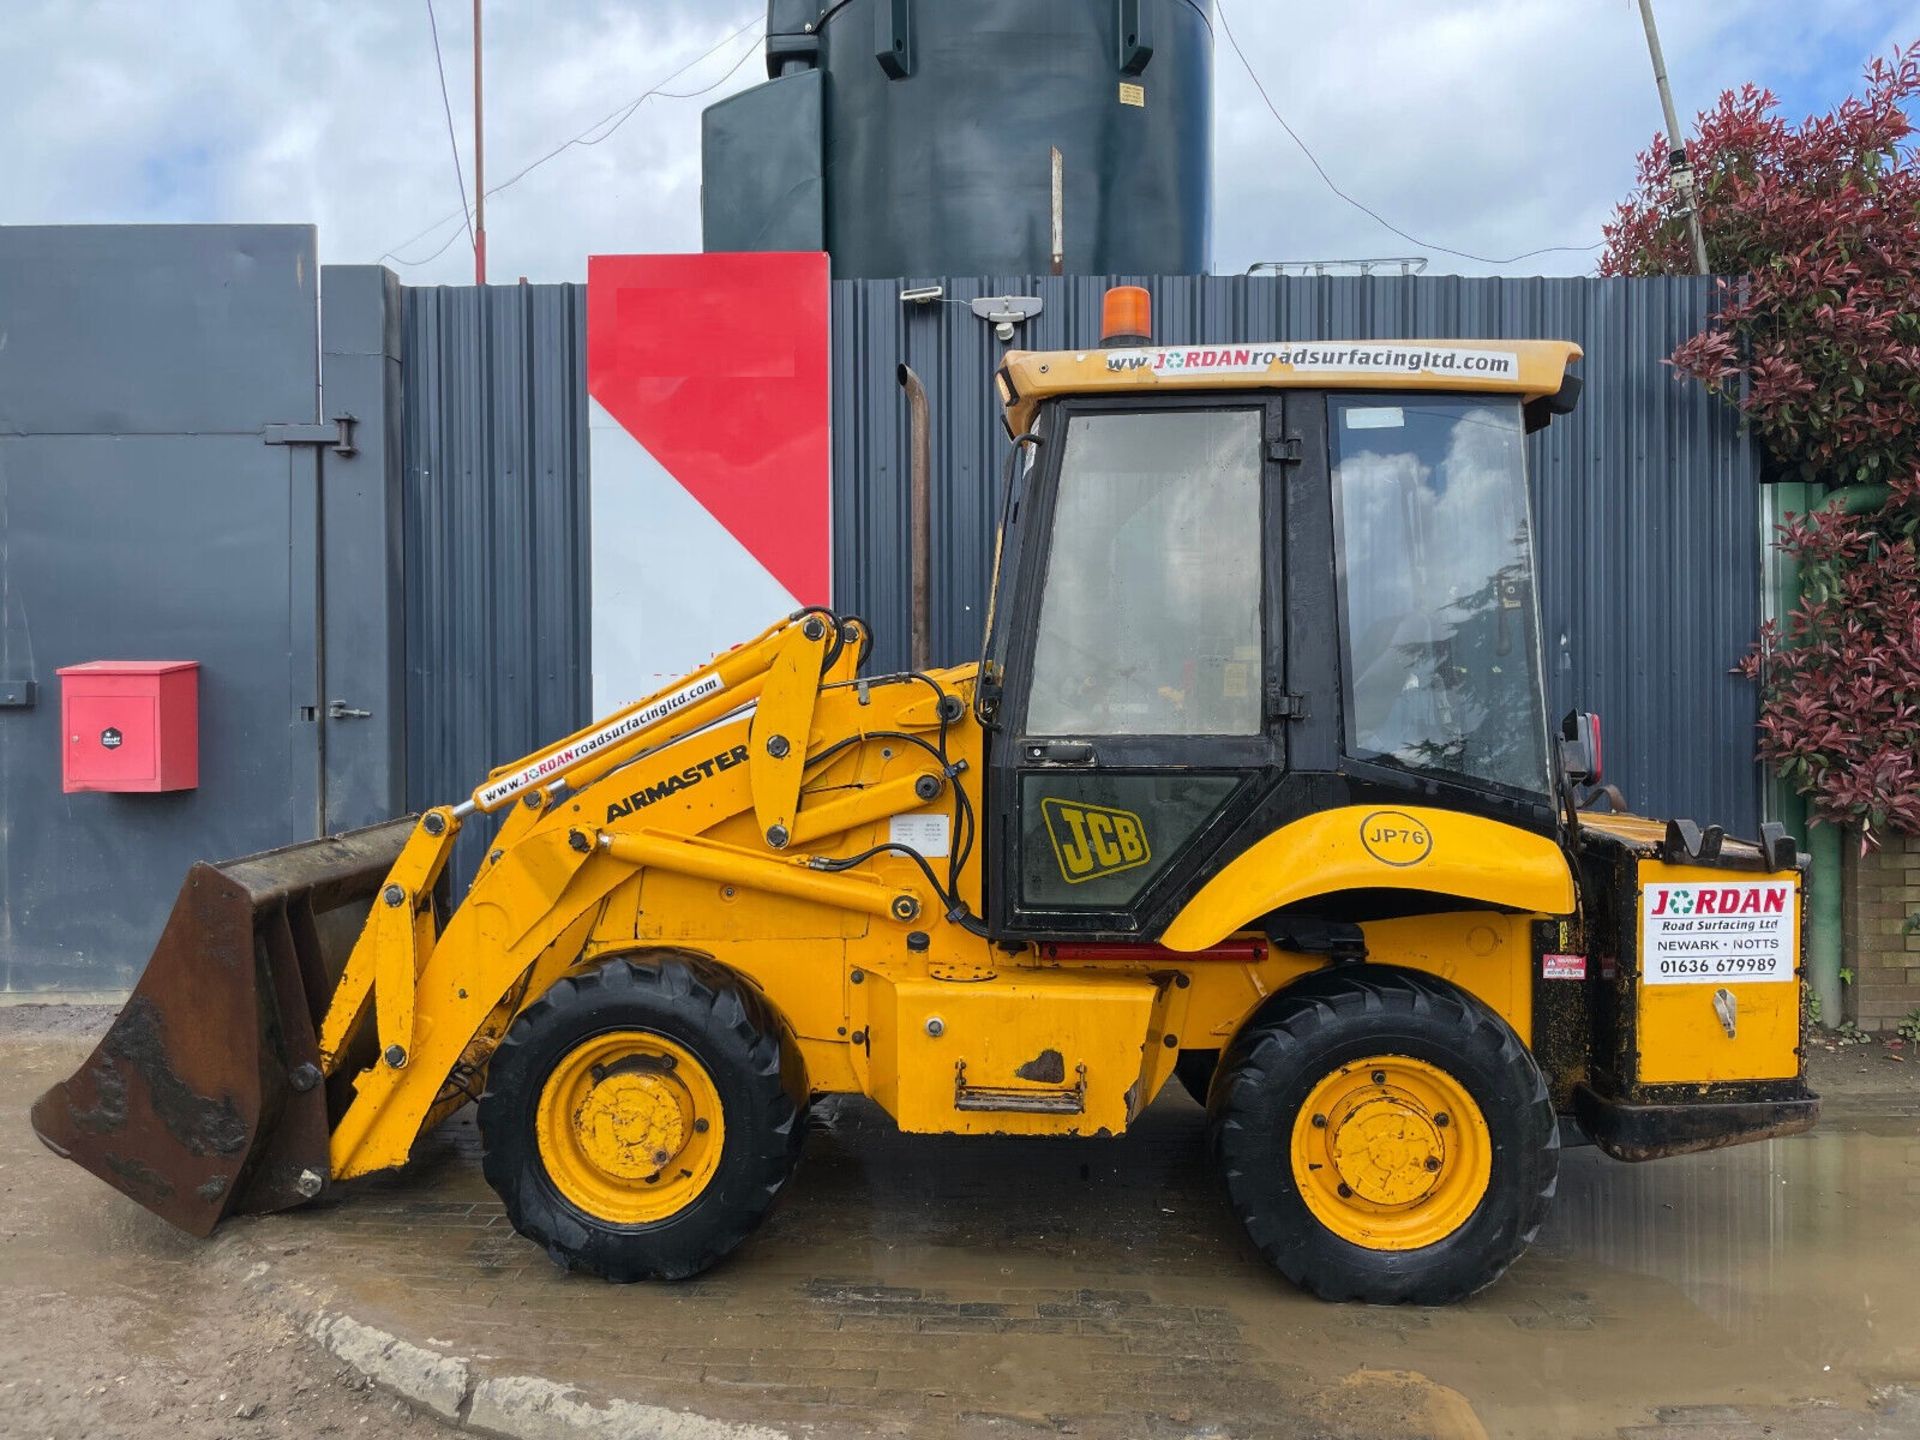 2002 JCB 2CX AIRMASTER: 4X4 LOADER WITH MANUAL GEARBOX POWER - Image 3 of 12